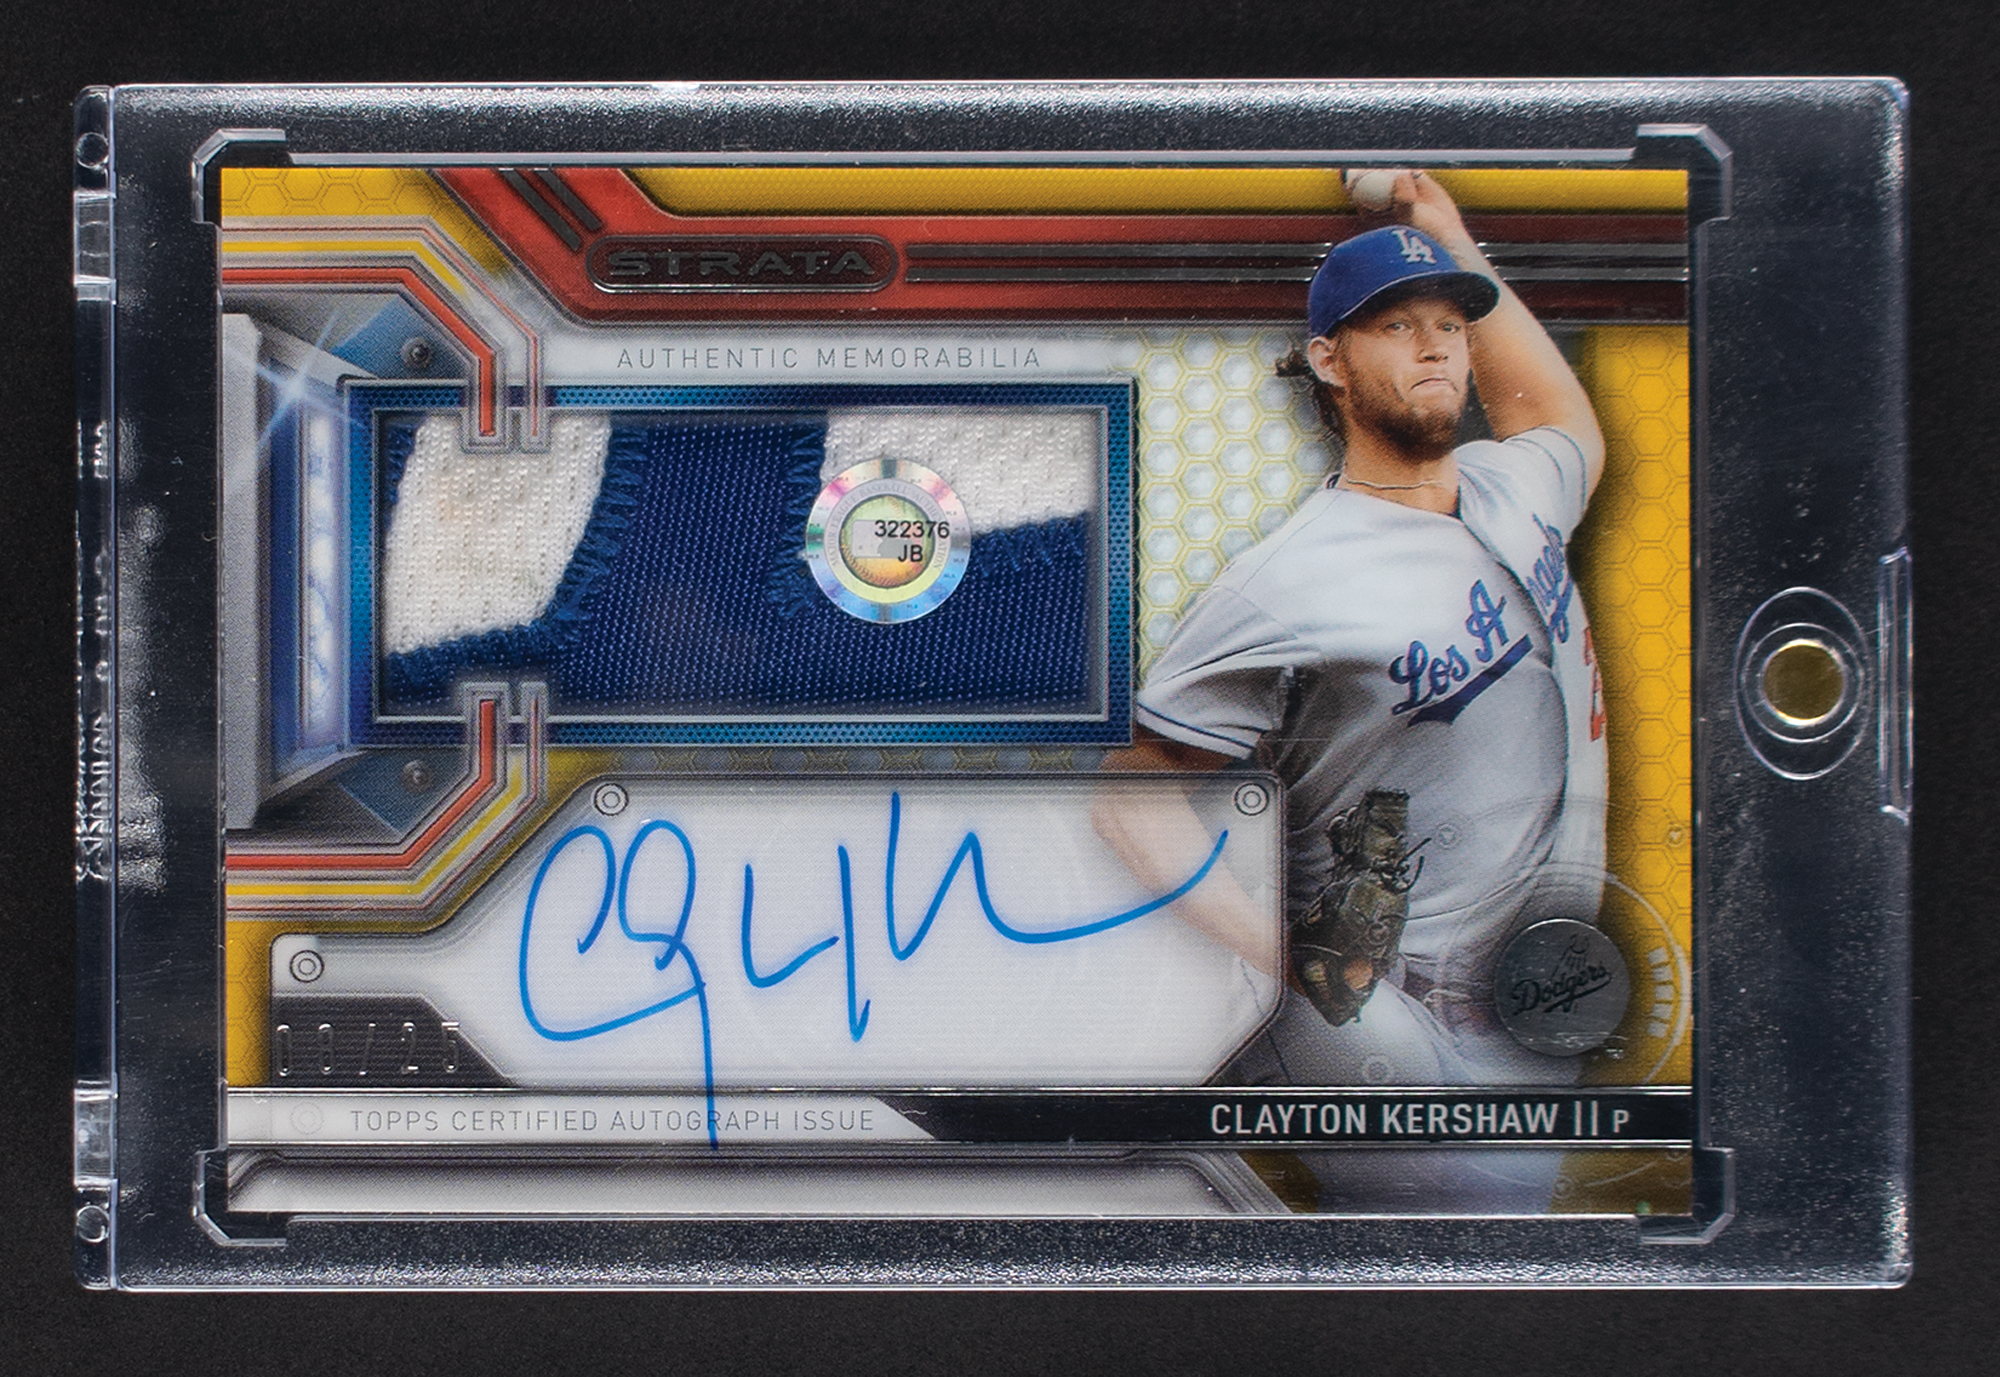 2016 Topps Strata Clayton Kershaw Autograph/Patch (8/25)